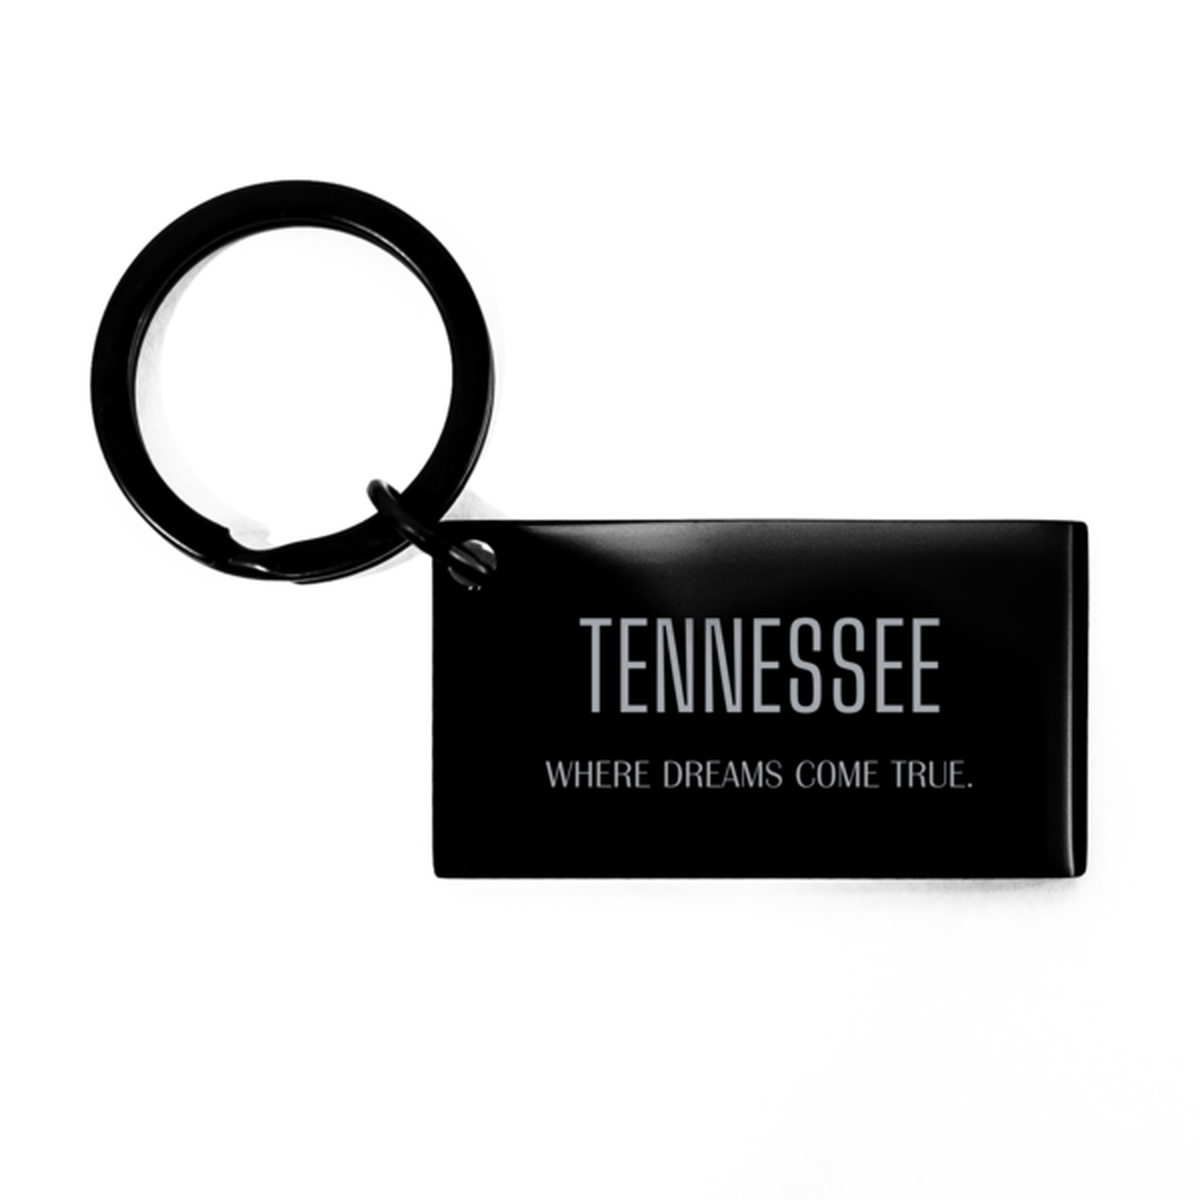 Love Tennessee State Keychain, Tennessee Where dreams come true, Birthday Inspirational Gifts For Tennessee Men, Women, Friends